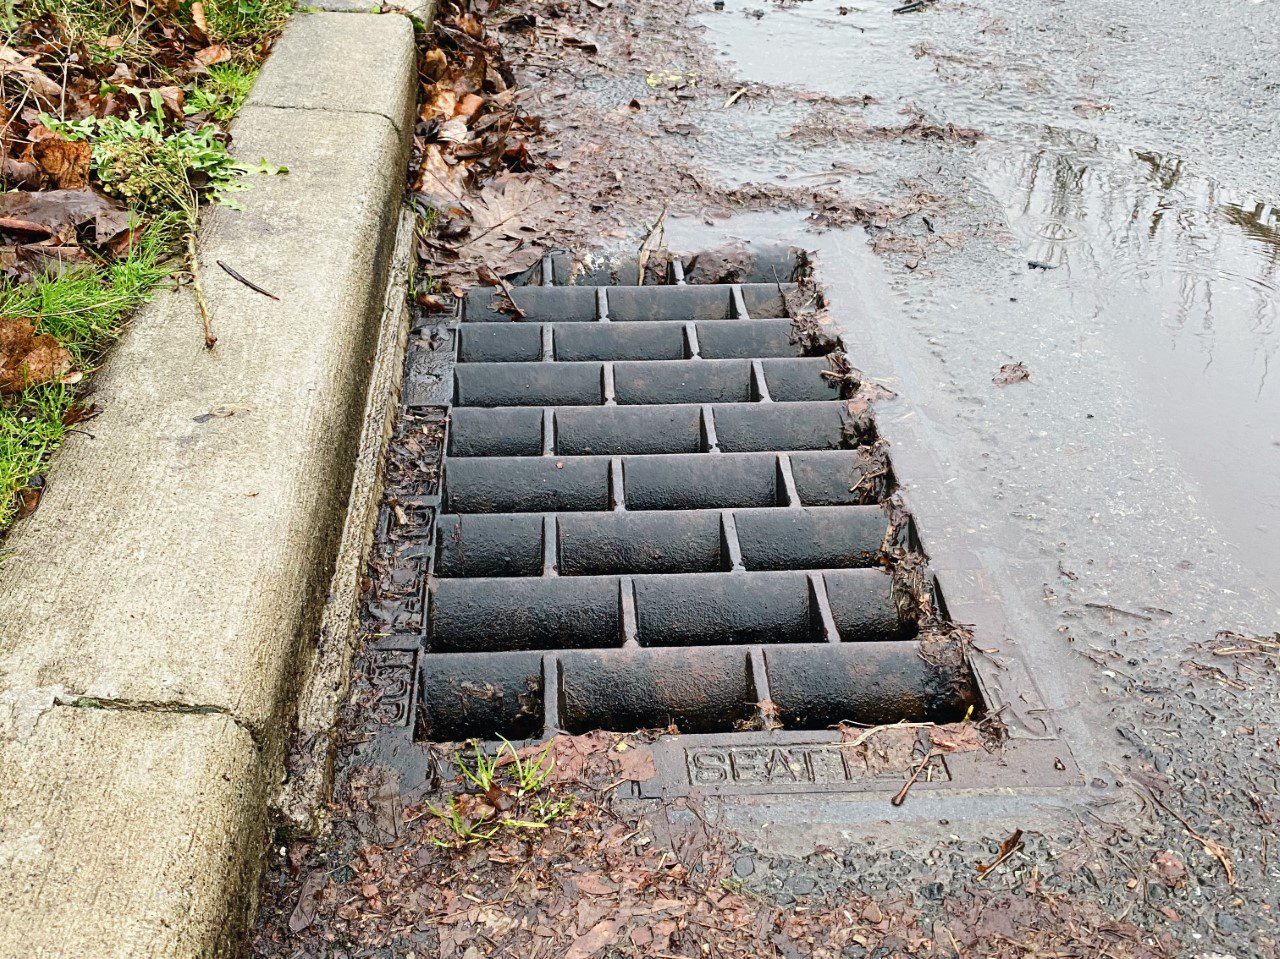 A storm drain in Seattle. Keeping these drains clear helps keep water out of the street. Leaves and debris are near the drain, along the curb.